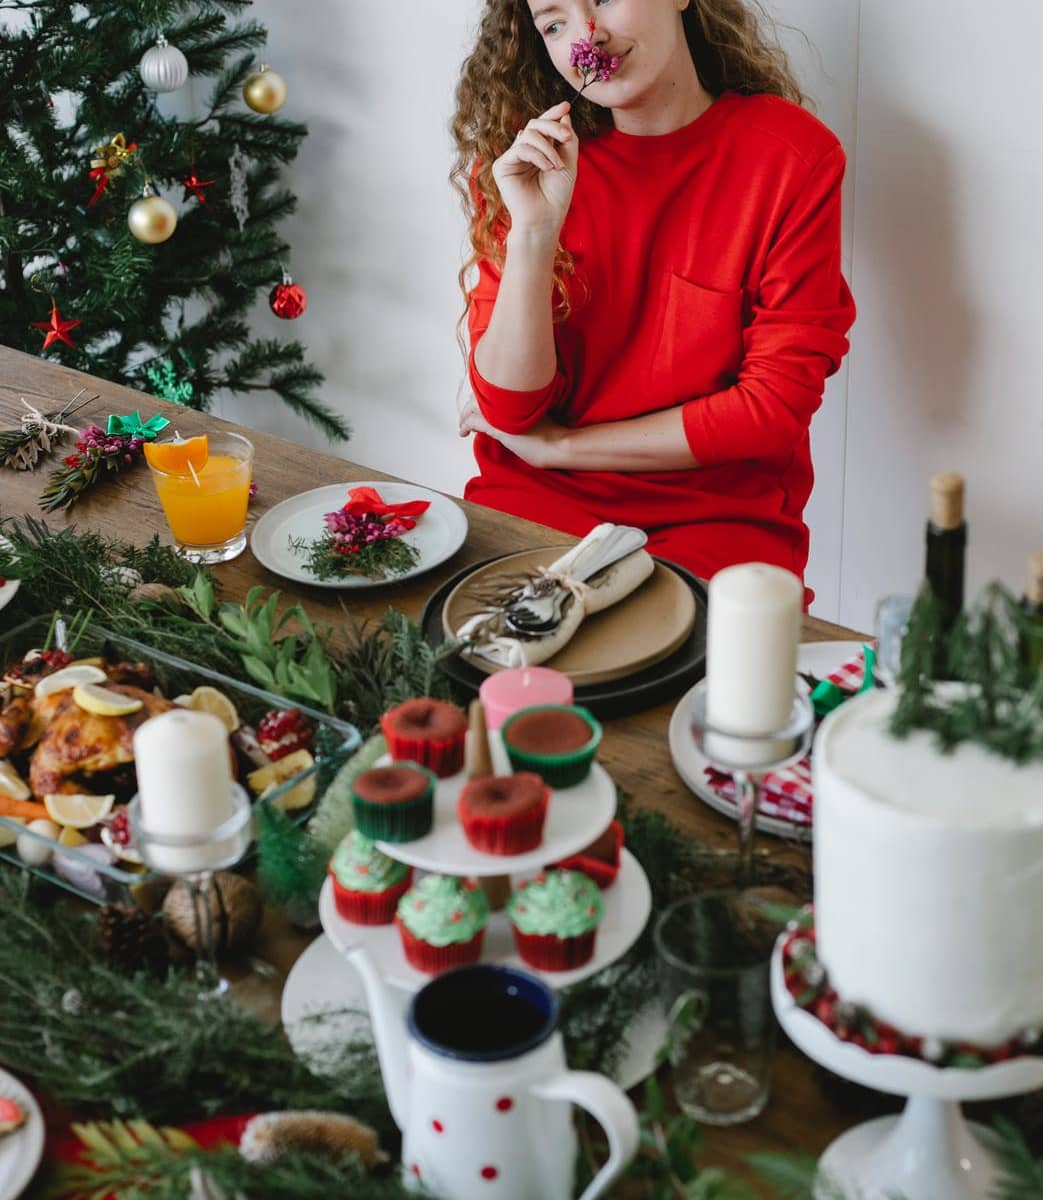 lady sitting at table with dinner near christmas tree